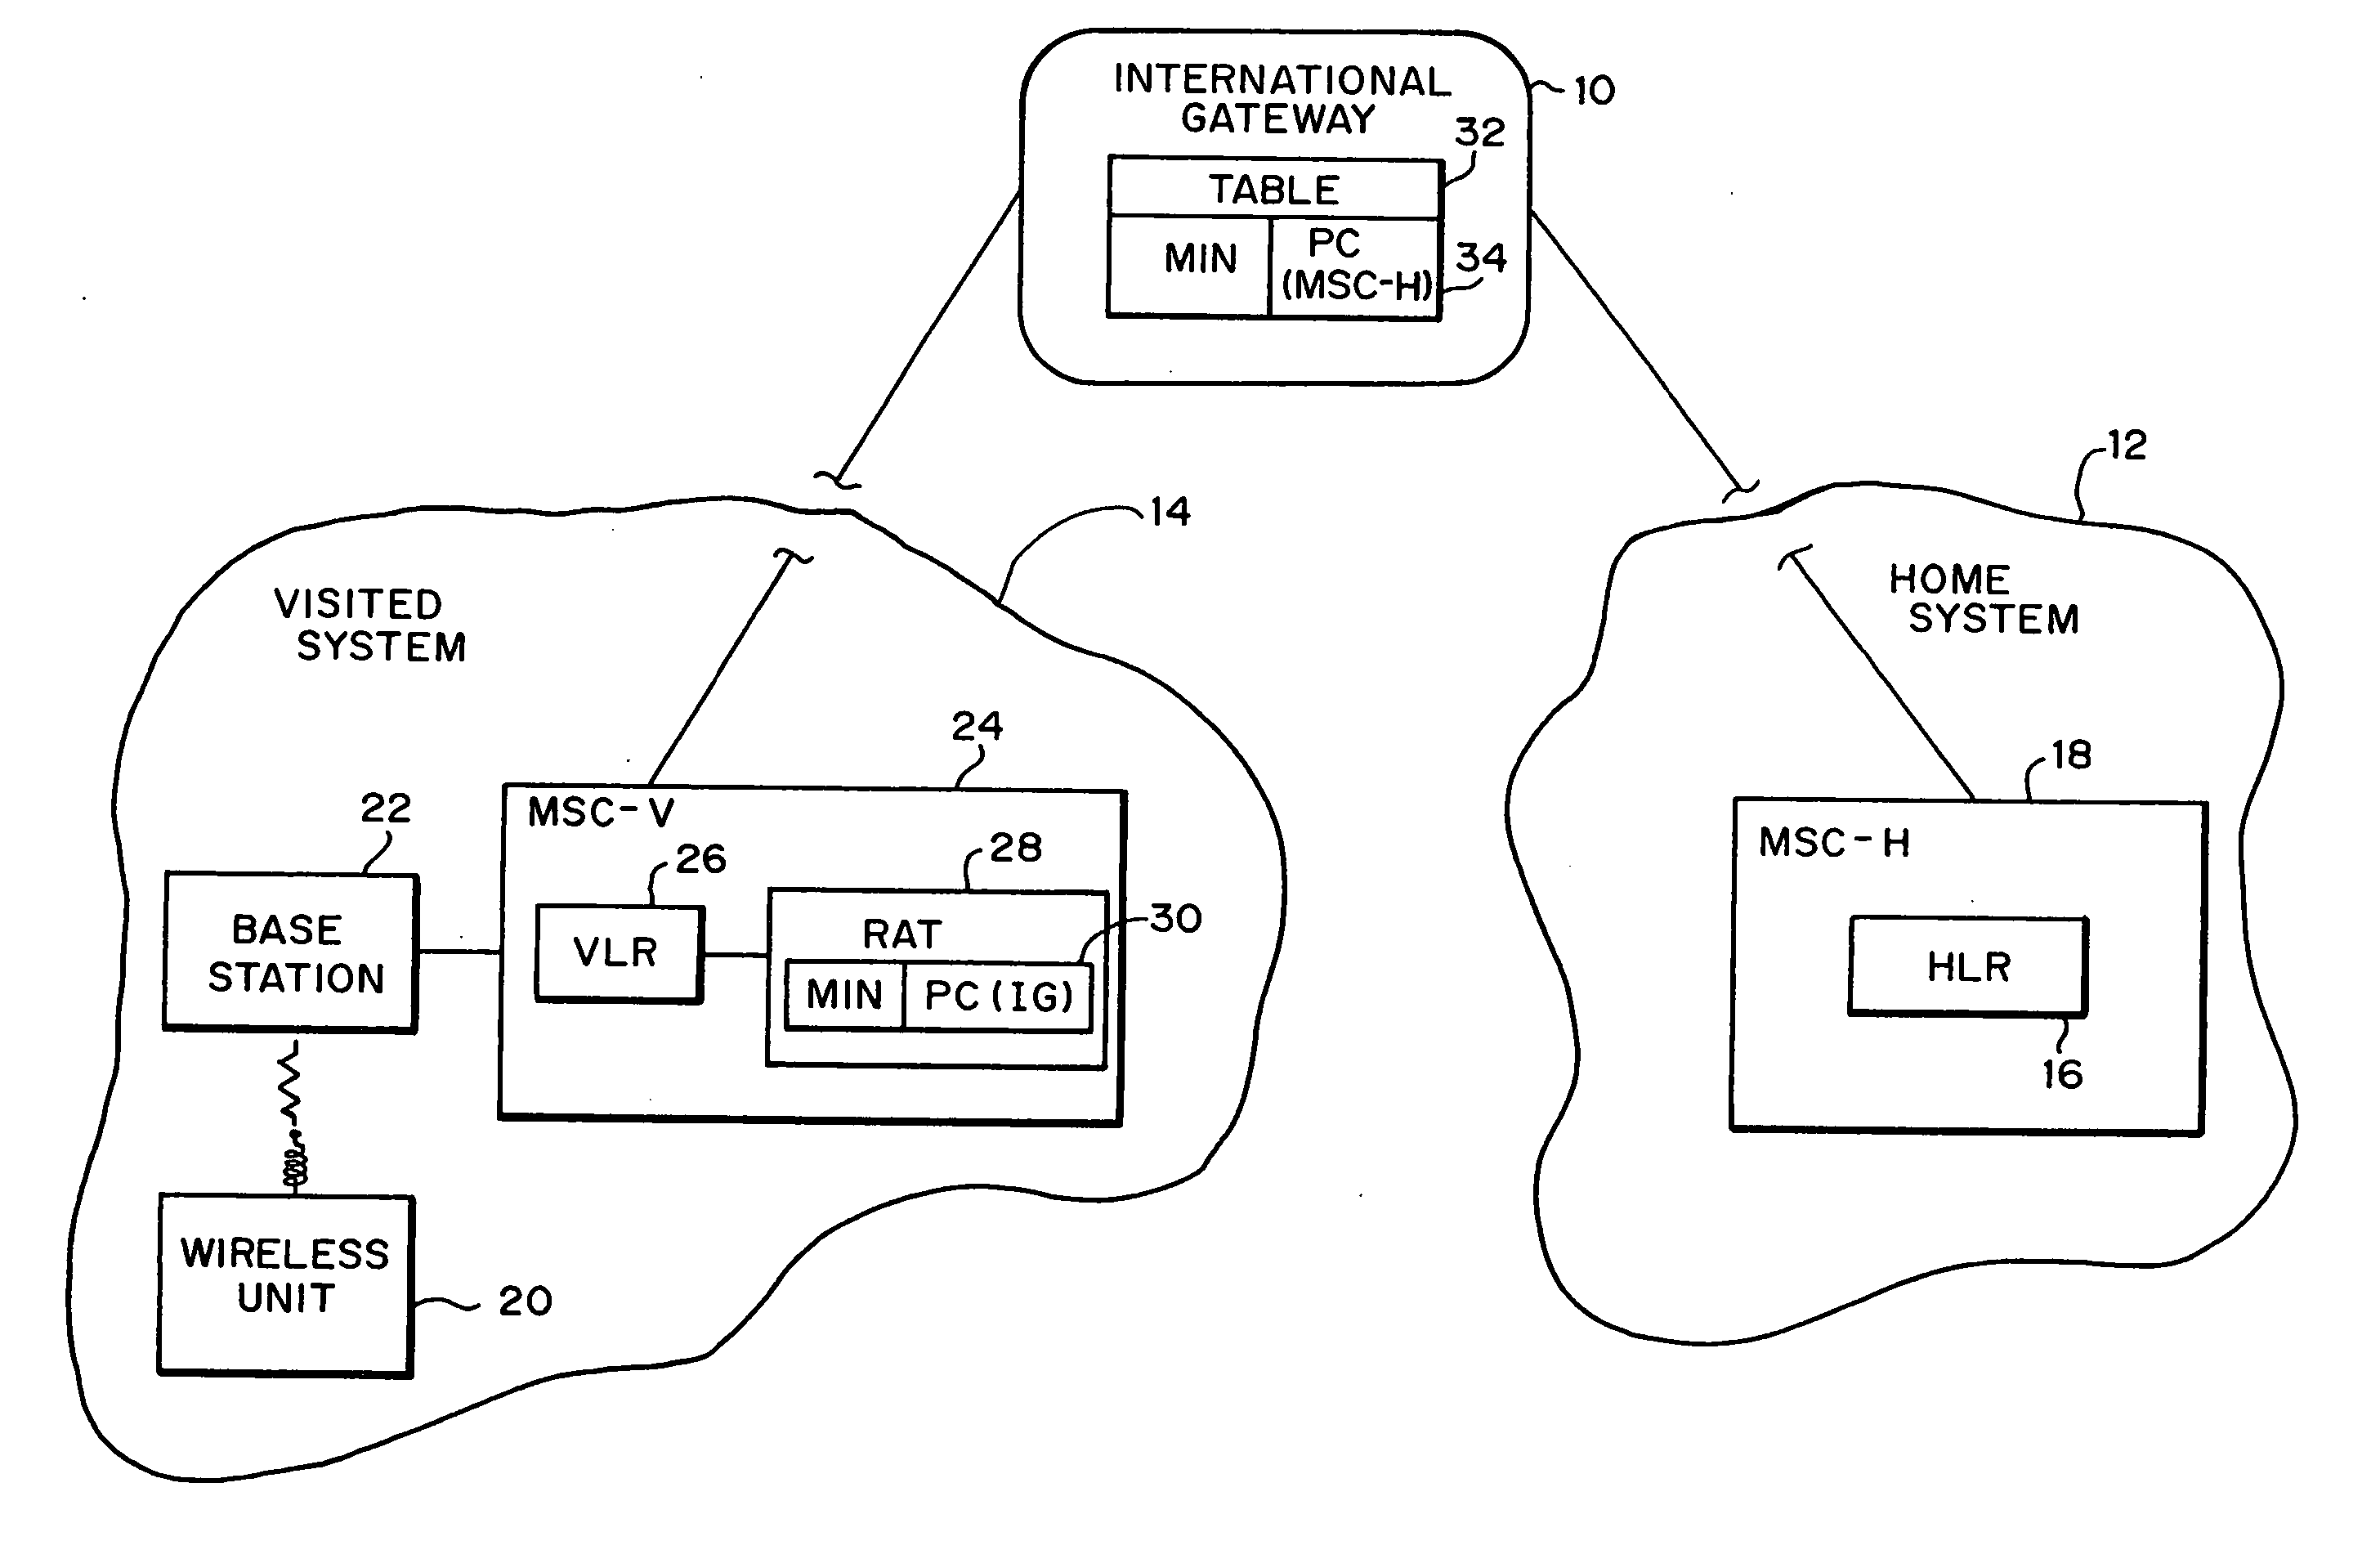 Method and systems for providing information to a home system regarding a wireless unit roaming in a visited system